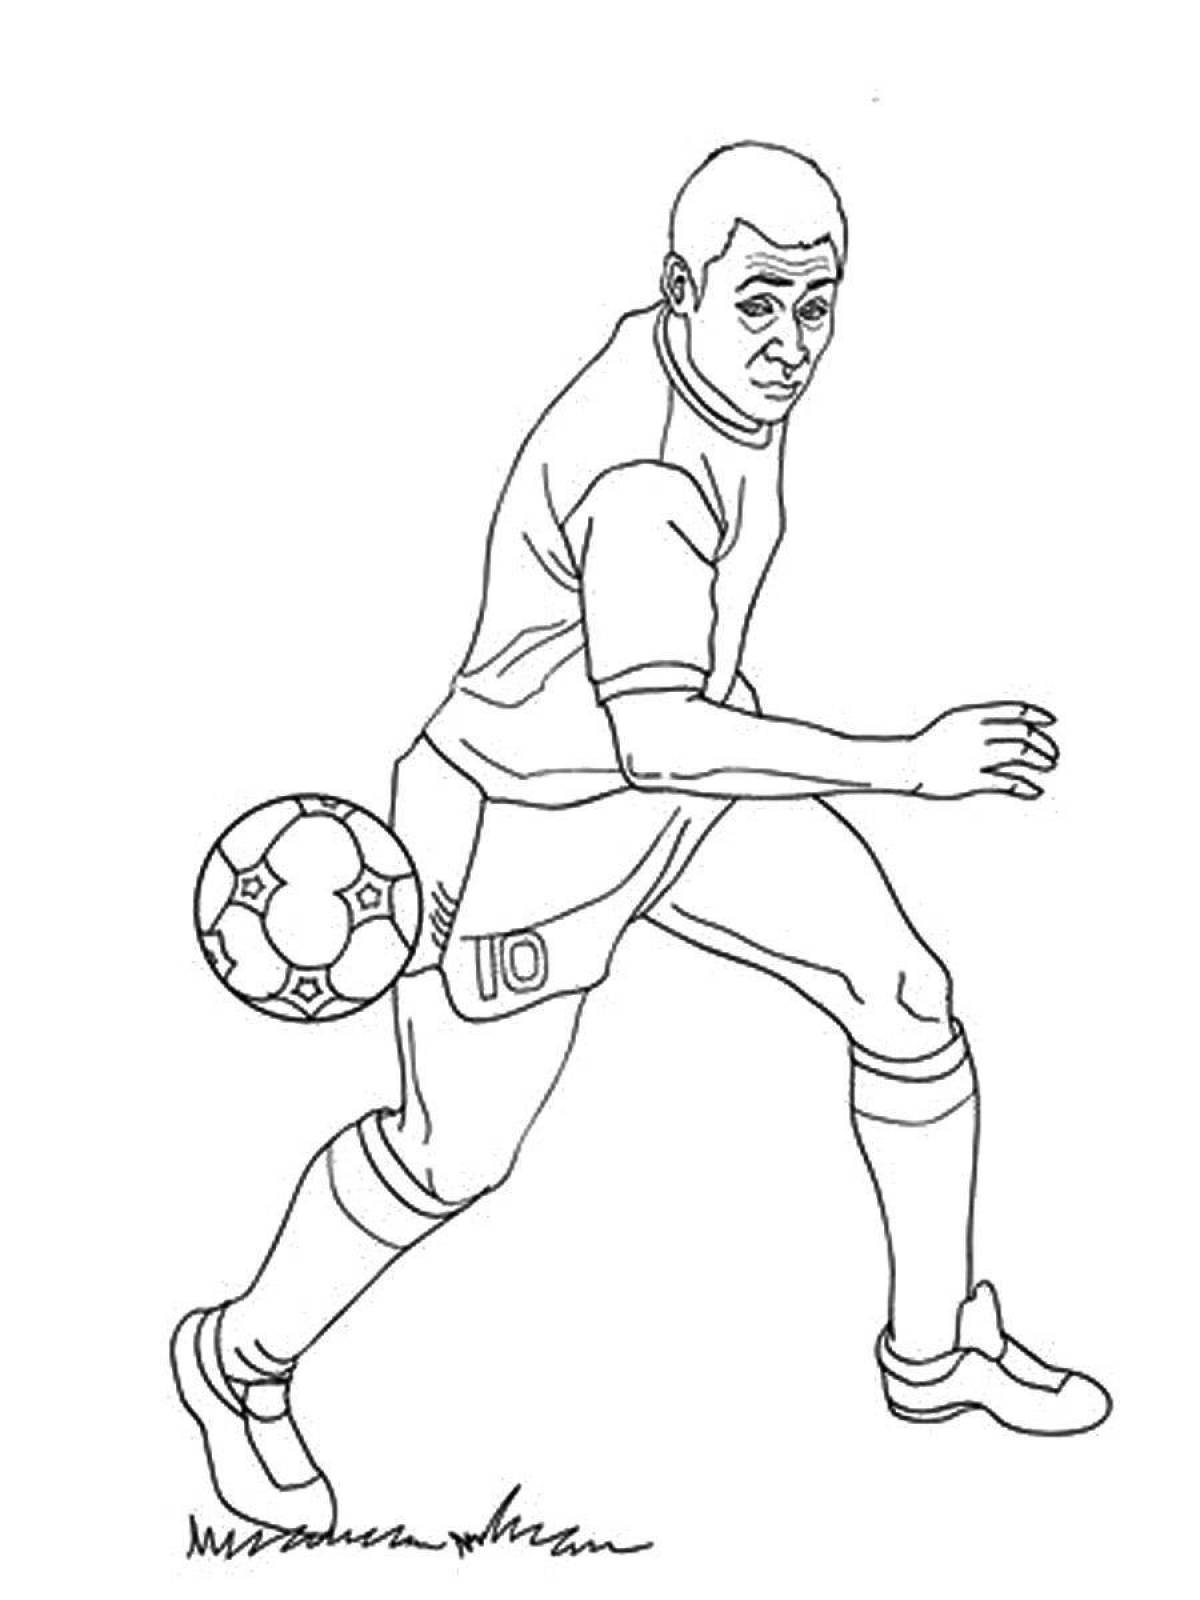 Coloring page dazzling pele